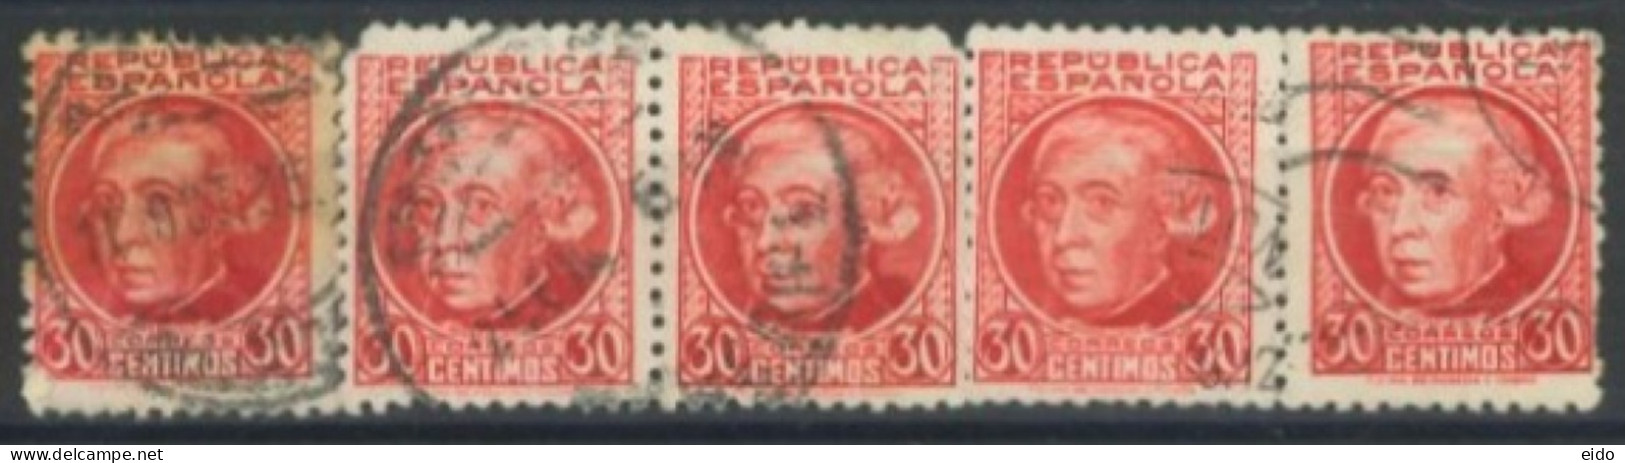 SPAIN, 1935/36, GASPAR MELCHOR DE JOVELLANOS STAMP QTY. 5, SPECIAL REDUCED PRICE, # 549, USED. - Used Stamps